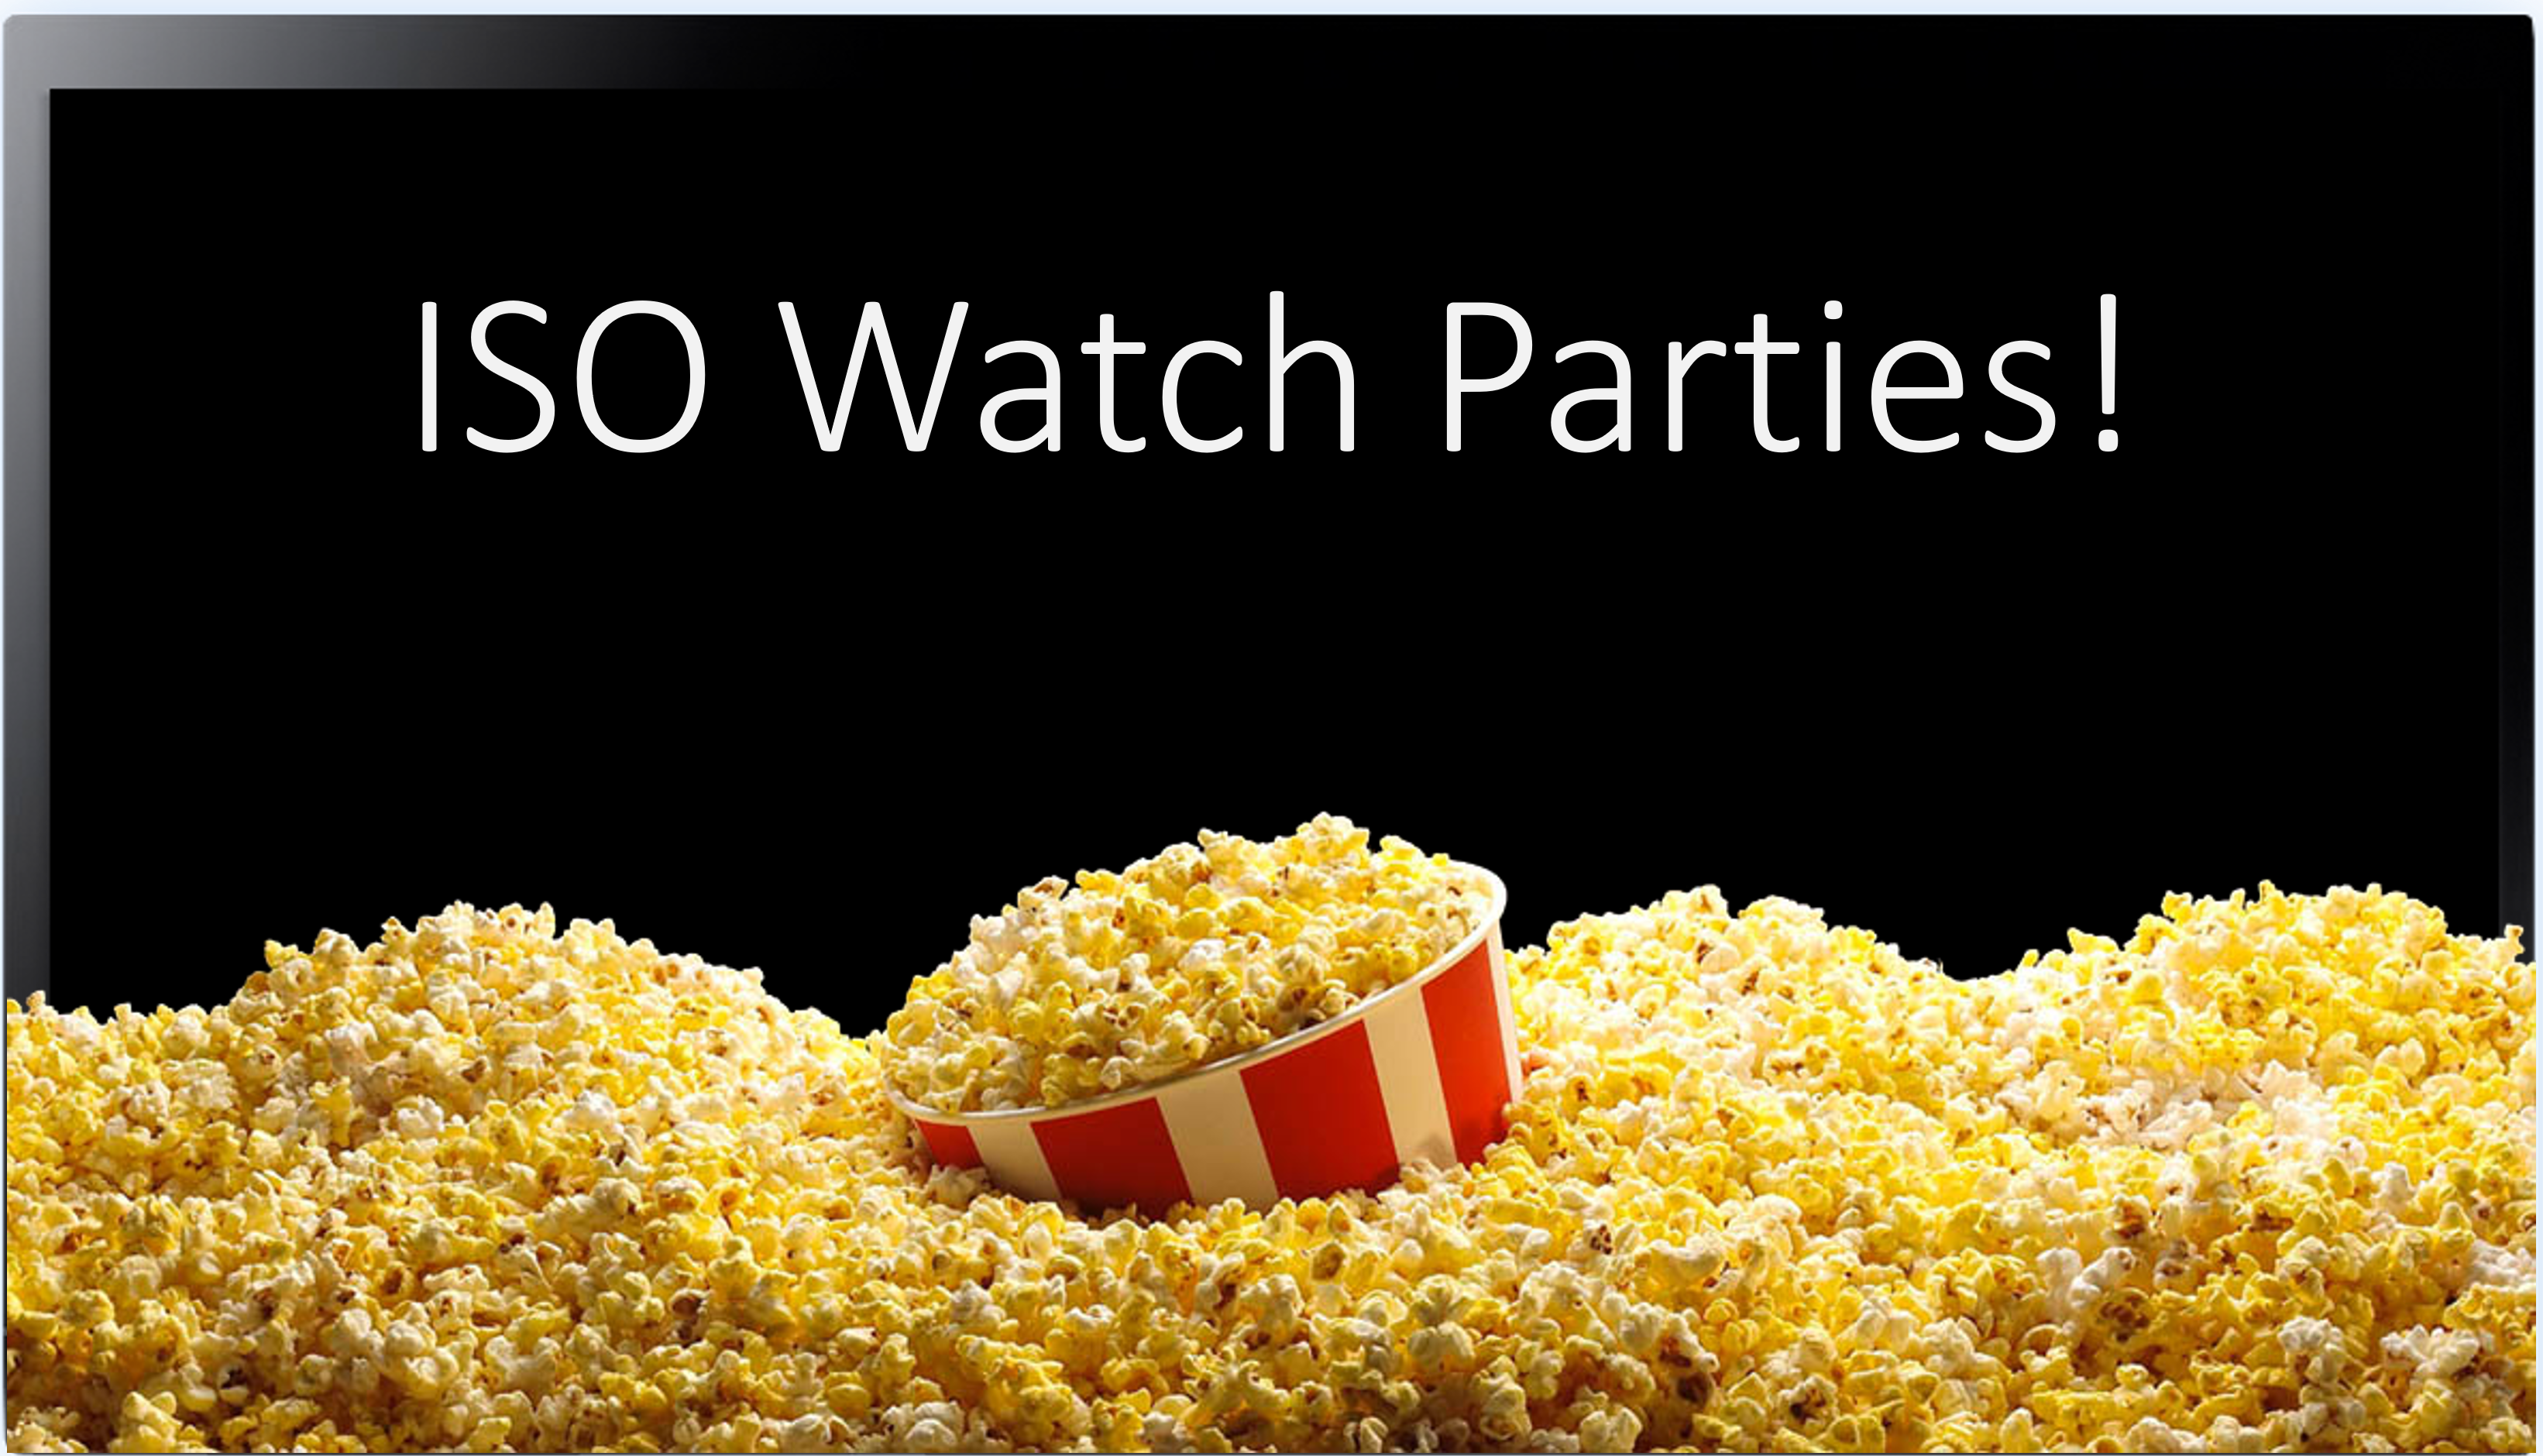 ISO Watch Parties